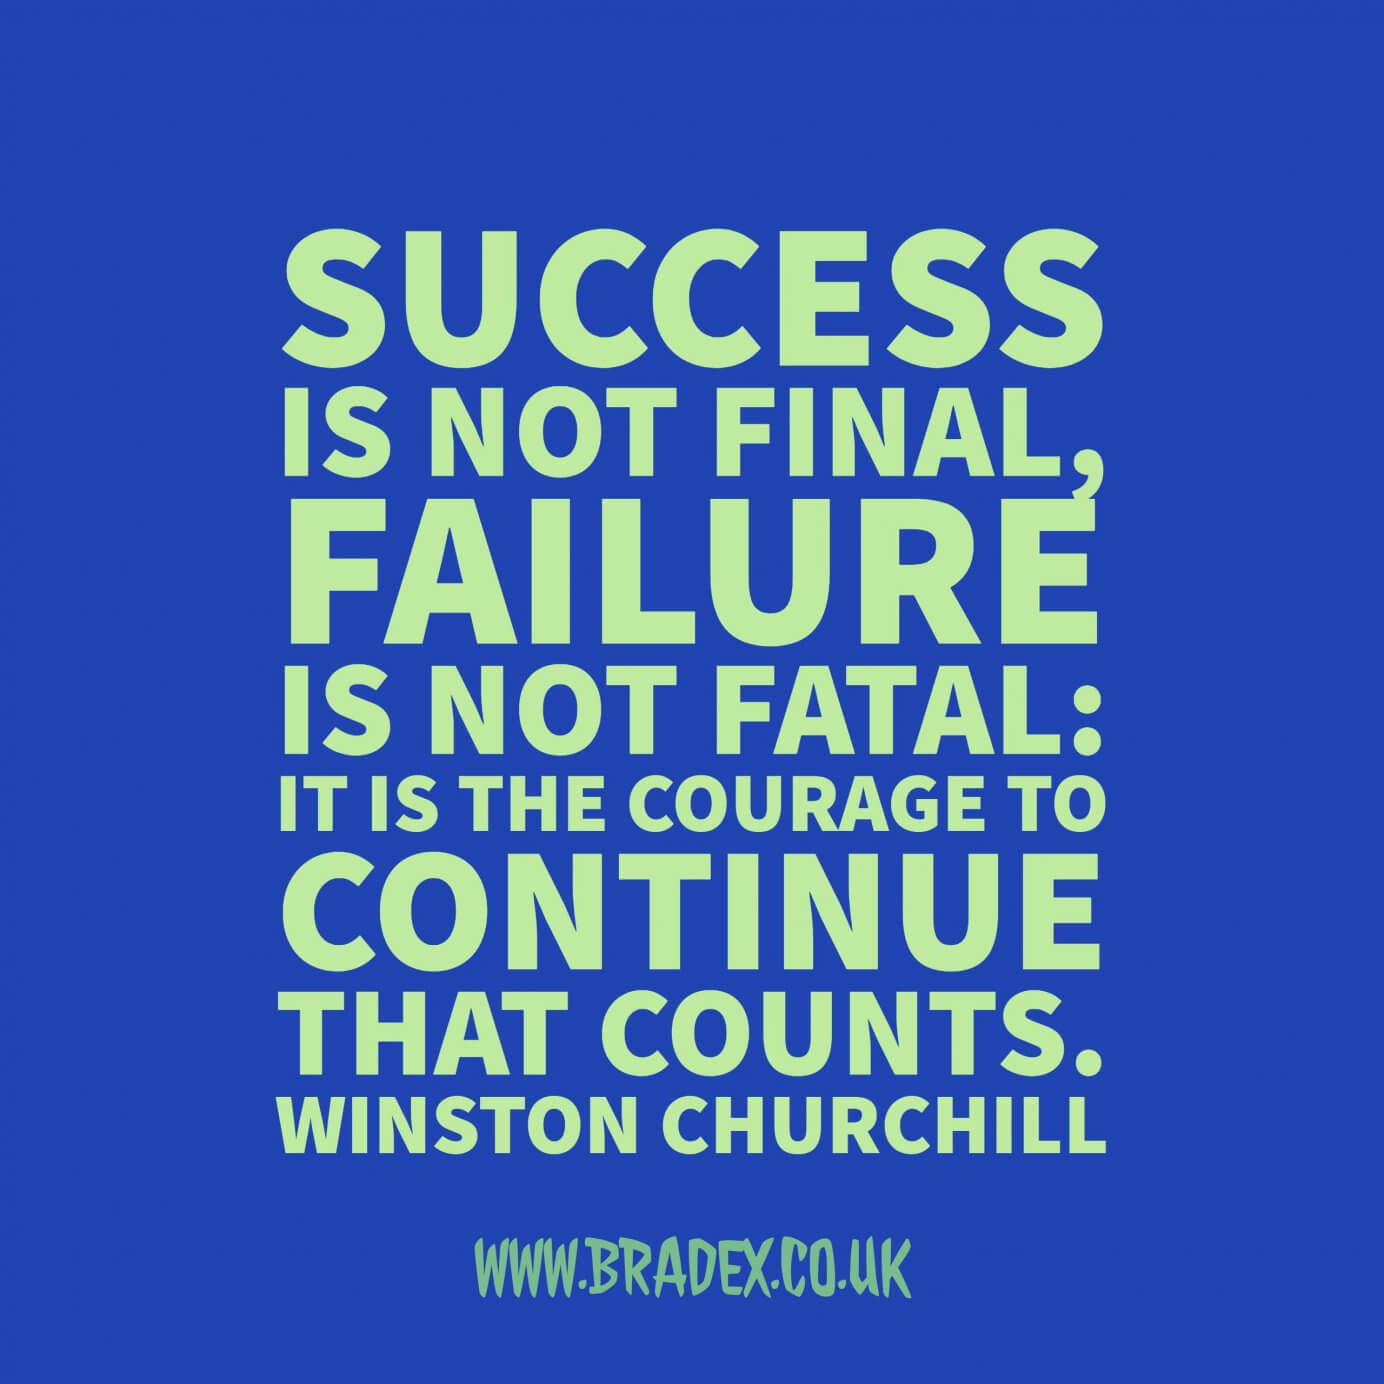 Failure is NOT Fatal